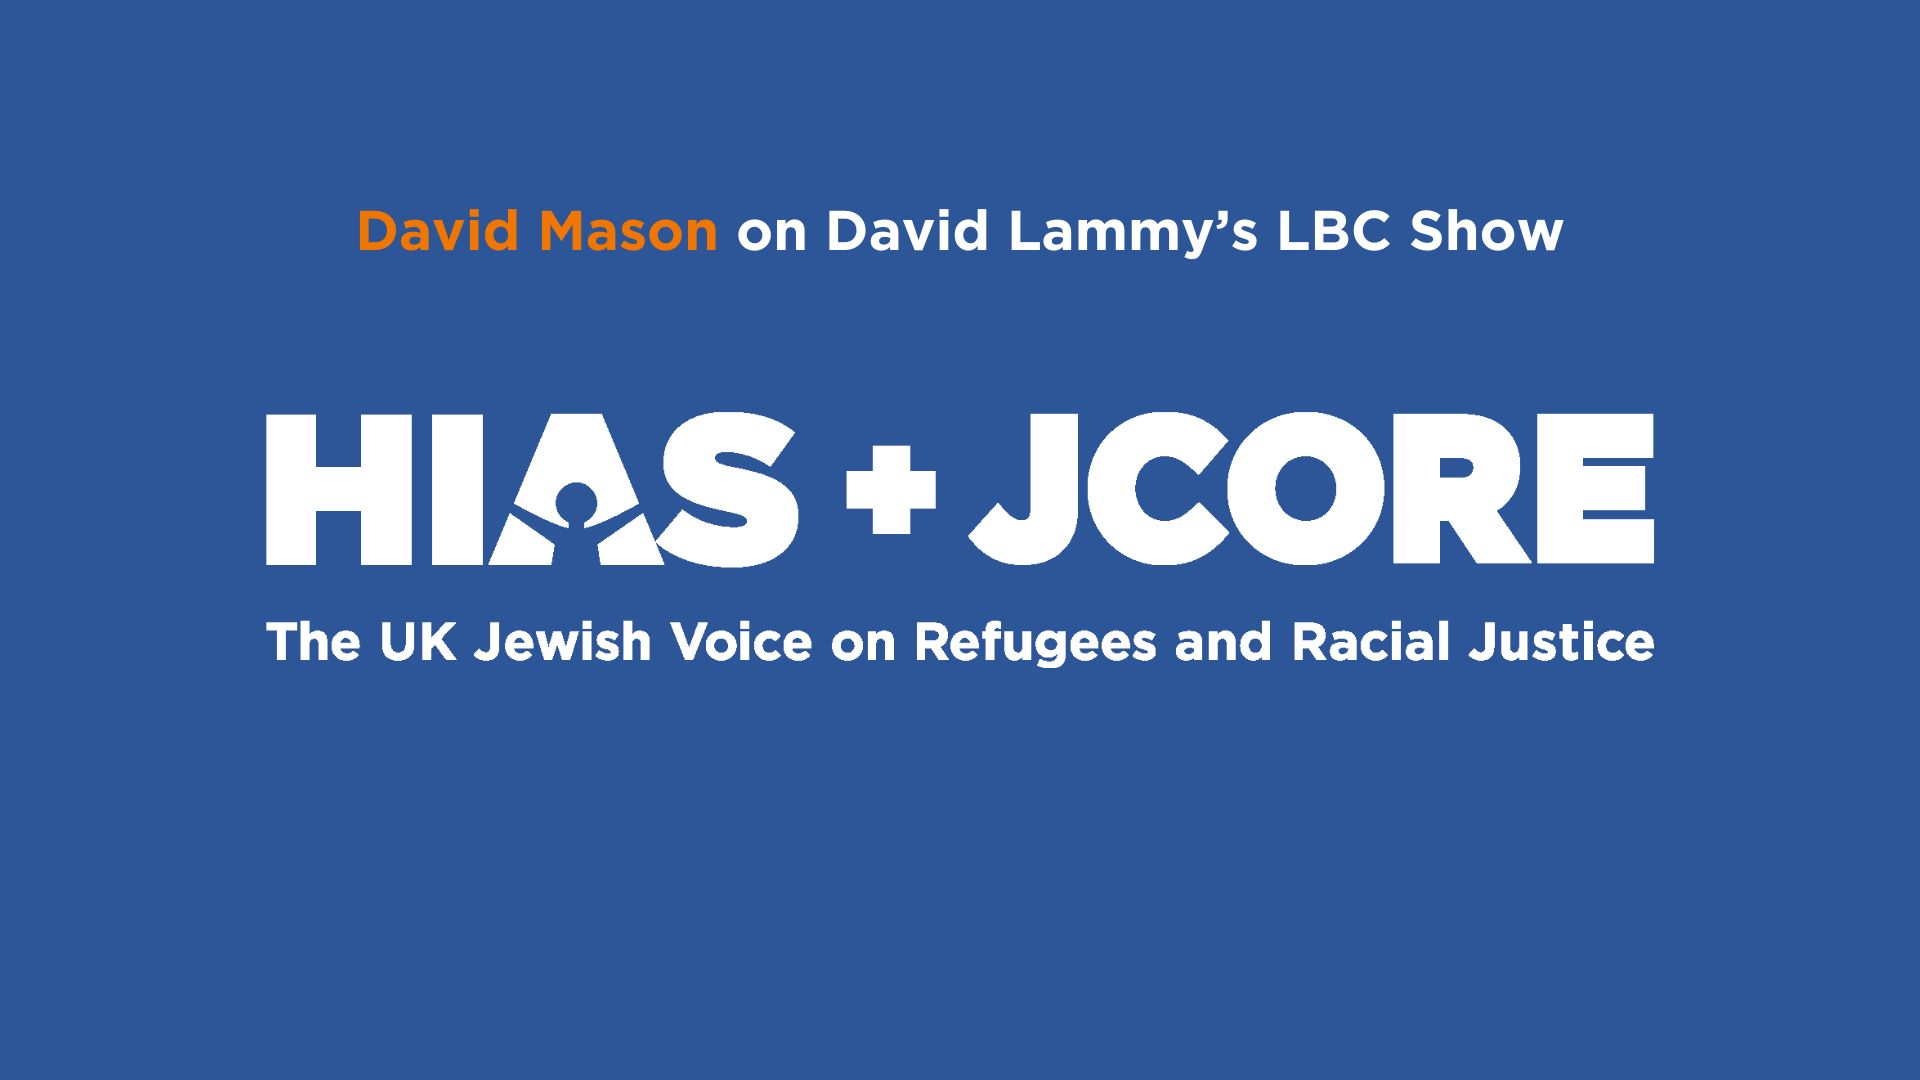 David Mason calls for communities to stand together on David Lammy’s LBC show